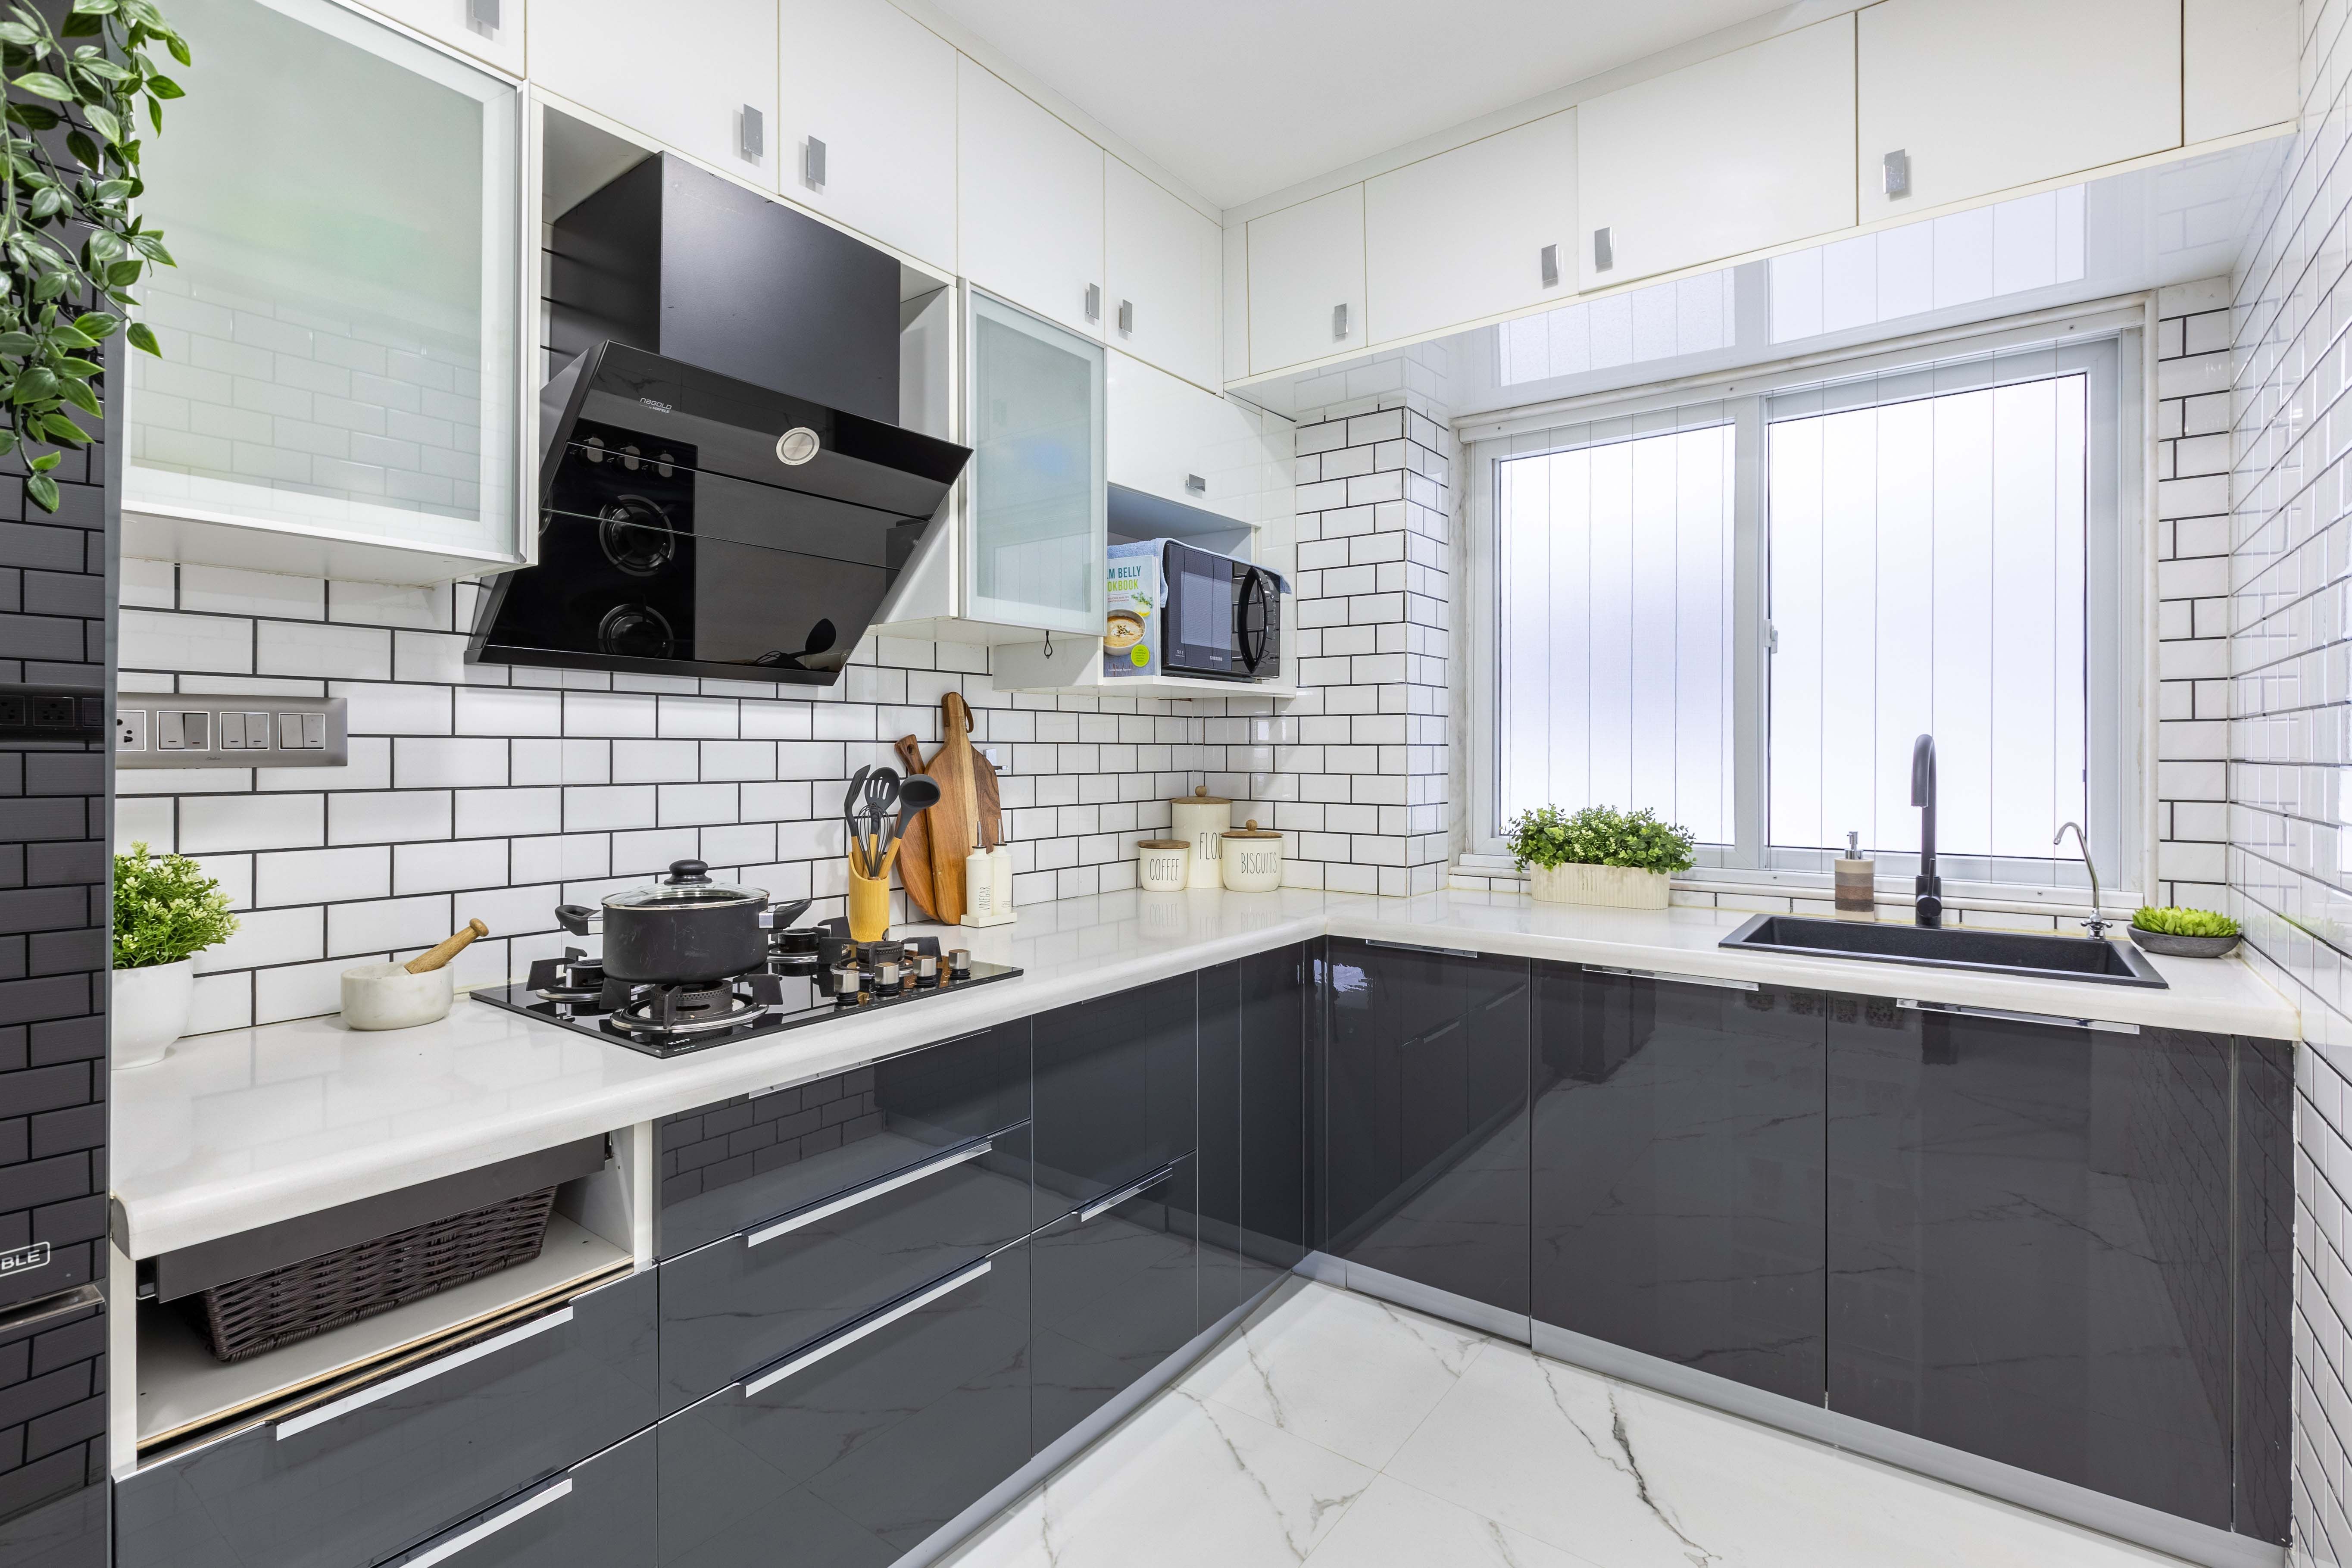 Modern L-Shaped Kitchen Design With Black And White Storage Units